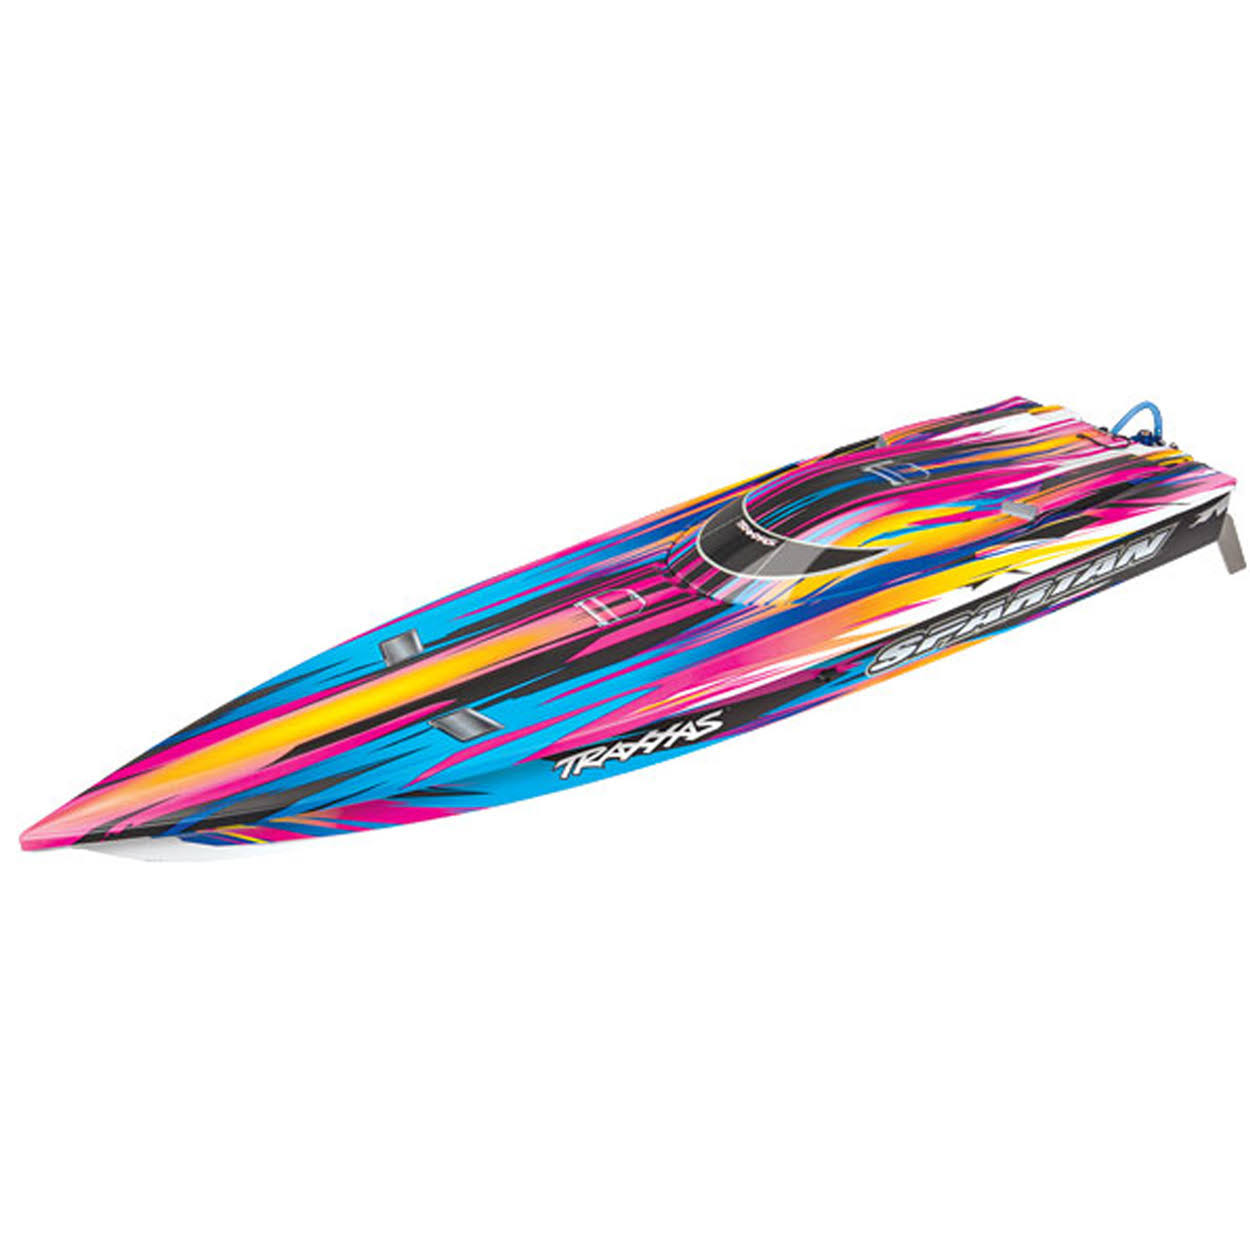 Traxxas 57076-4-PINK Spartan Brushless 36' Race Boat W